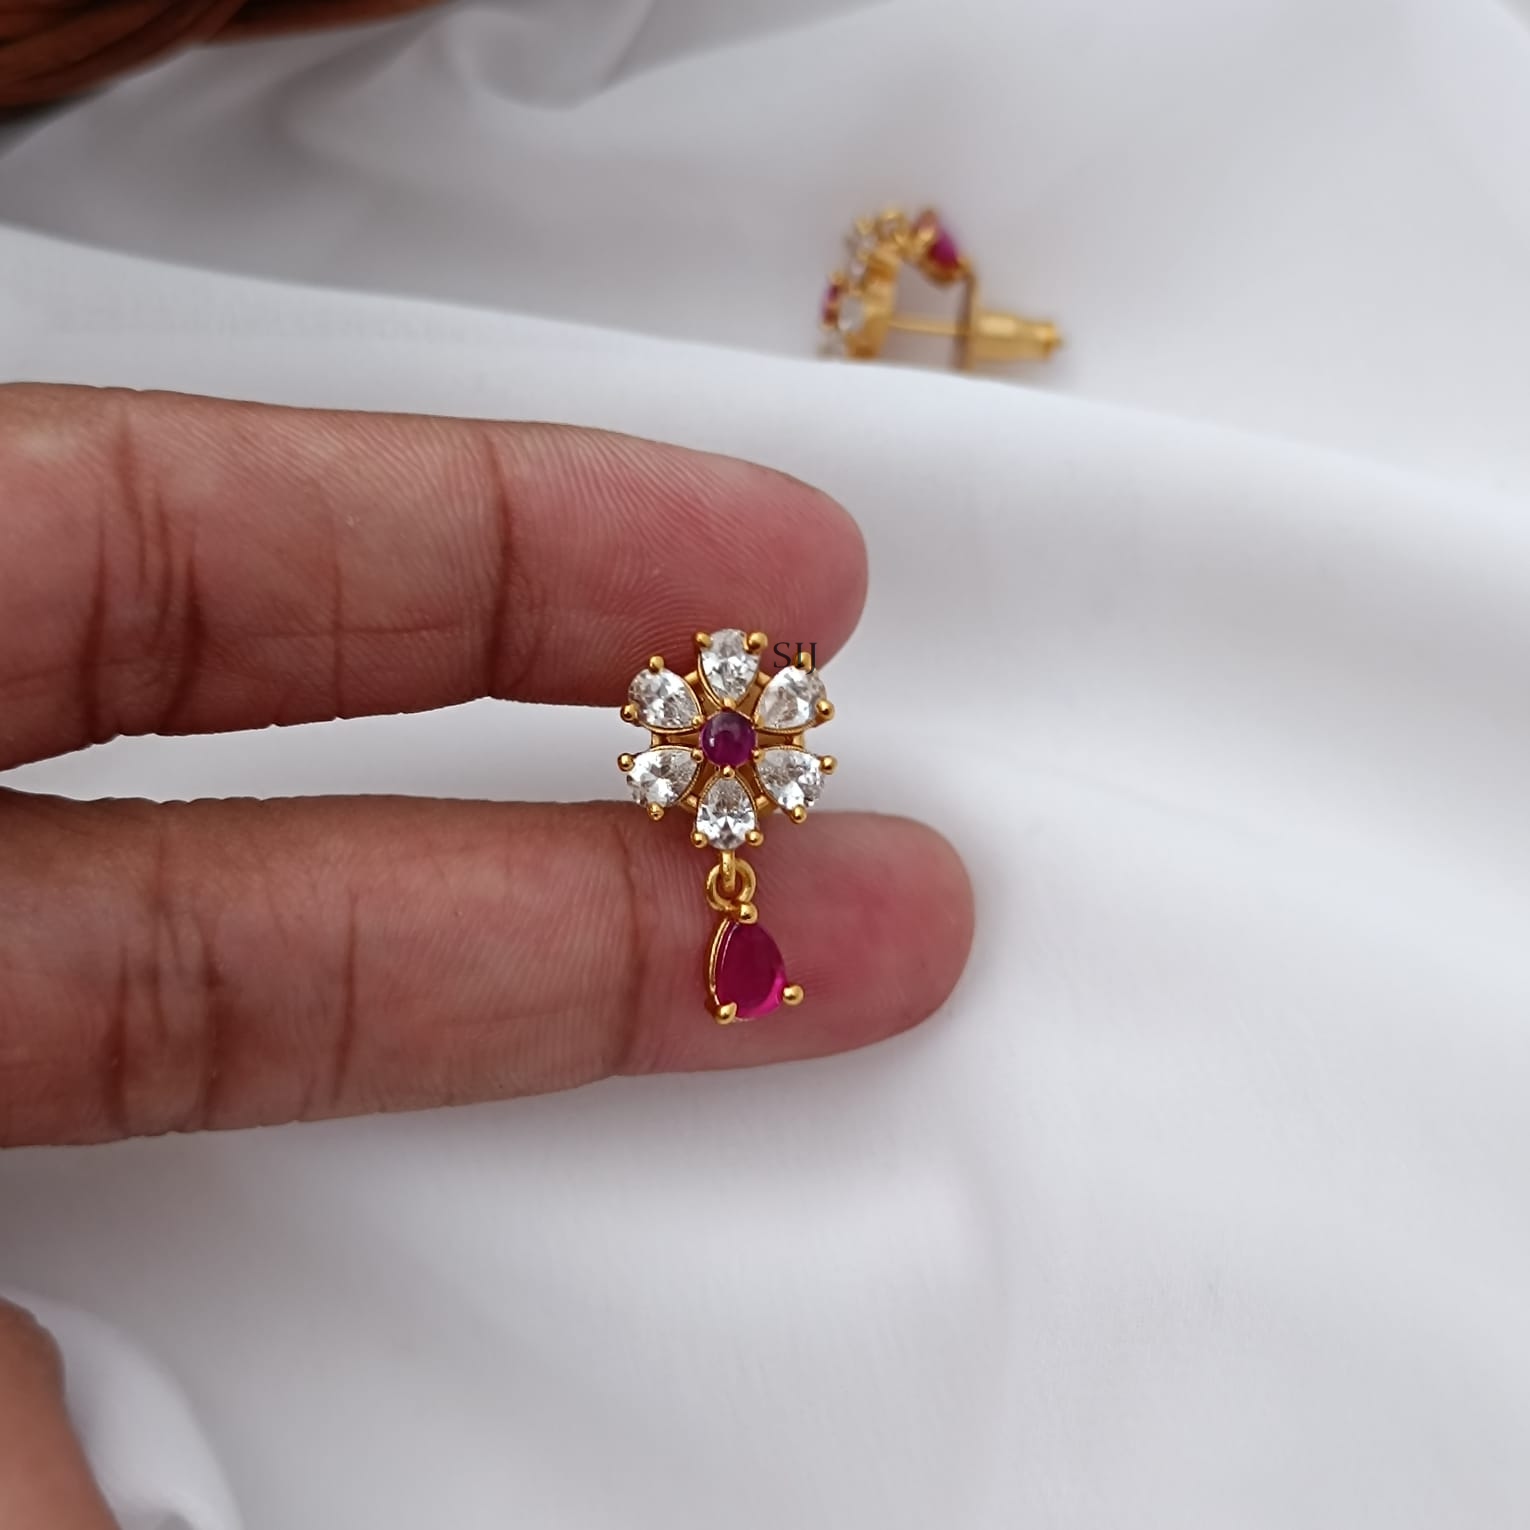 Attractive Pink and White Stones Flower Design Earrings